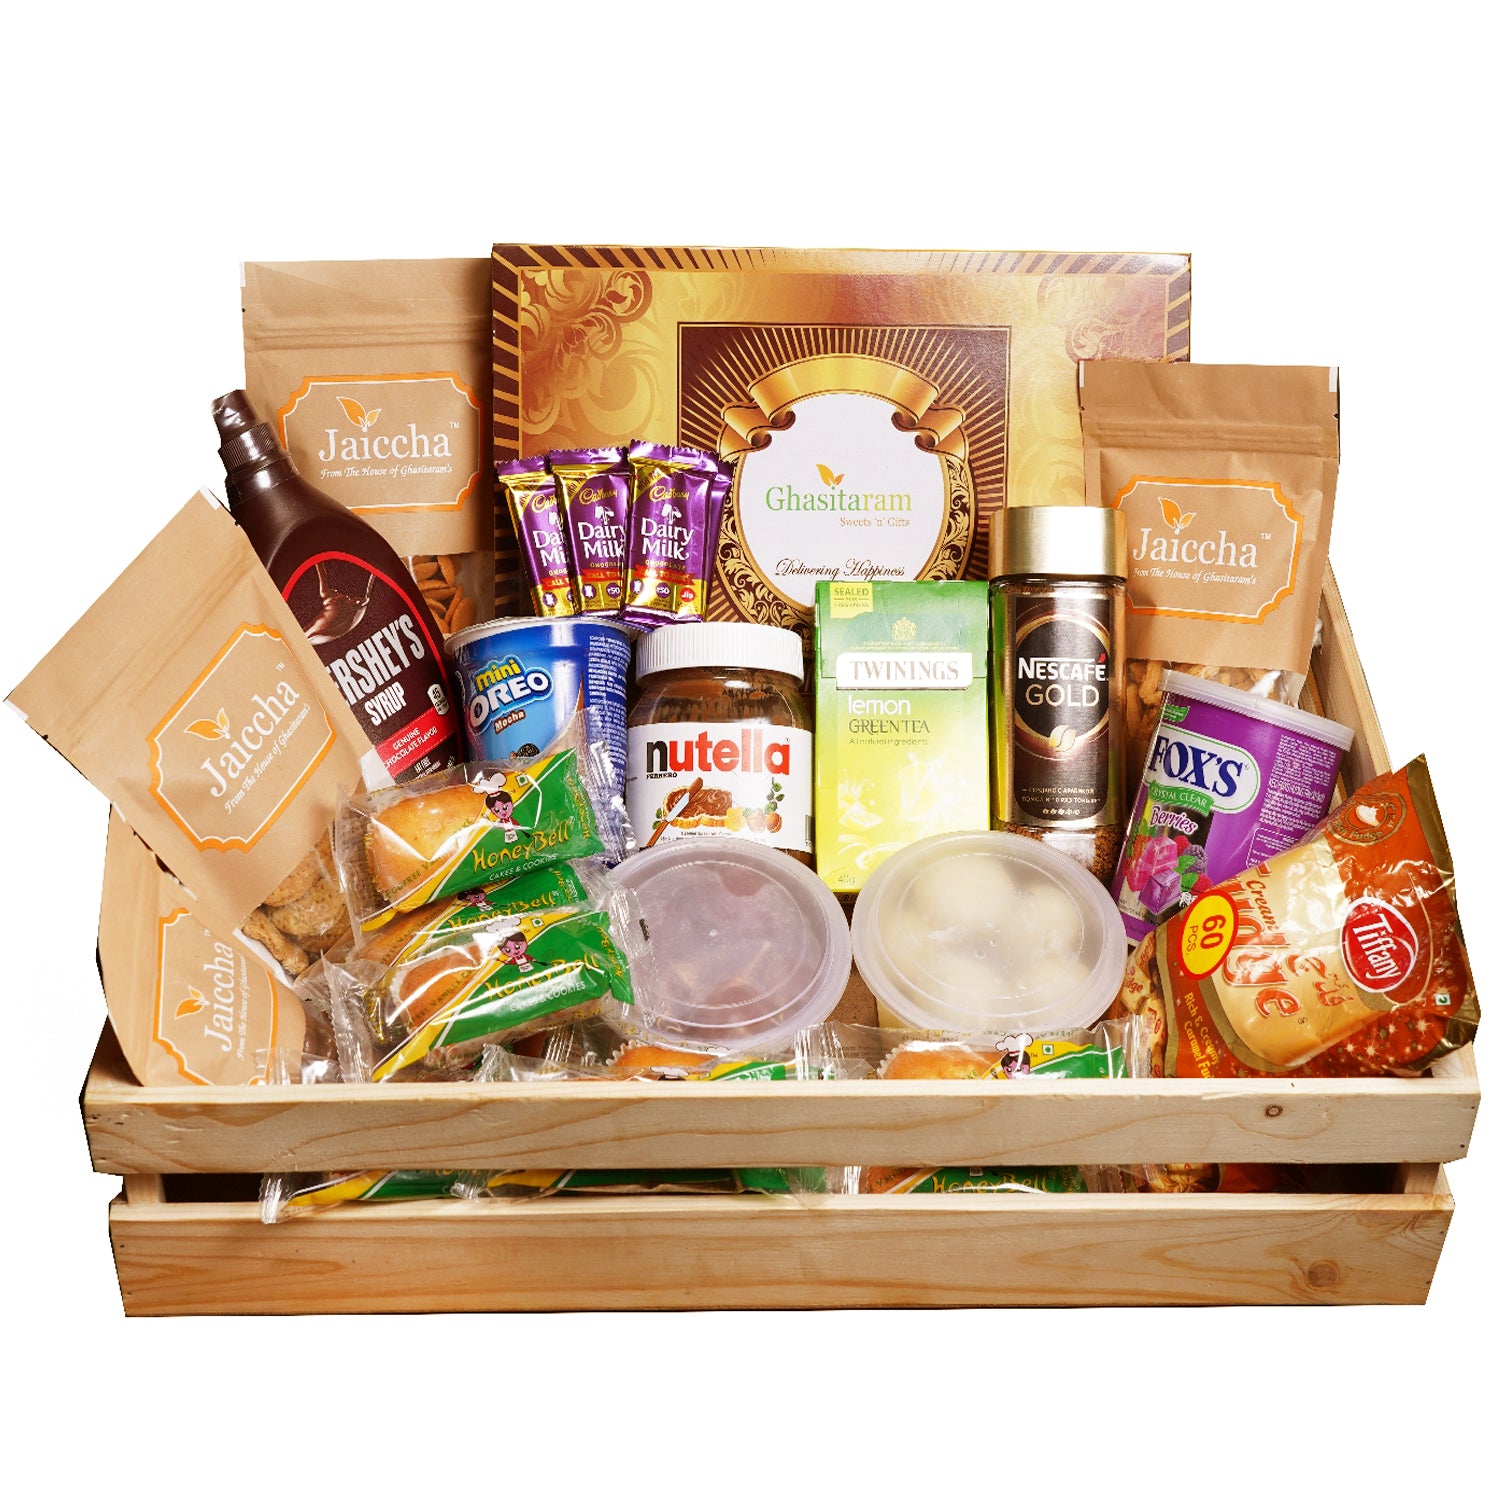 Kalimera with love Wooden Gift Basket | Luxury Food Hampers & Gift Boxes |  Worldwide Delivery